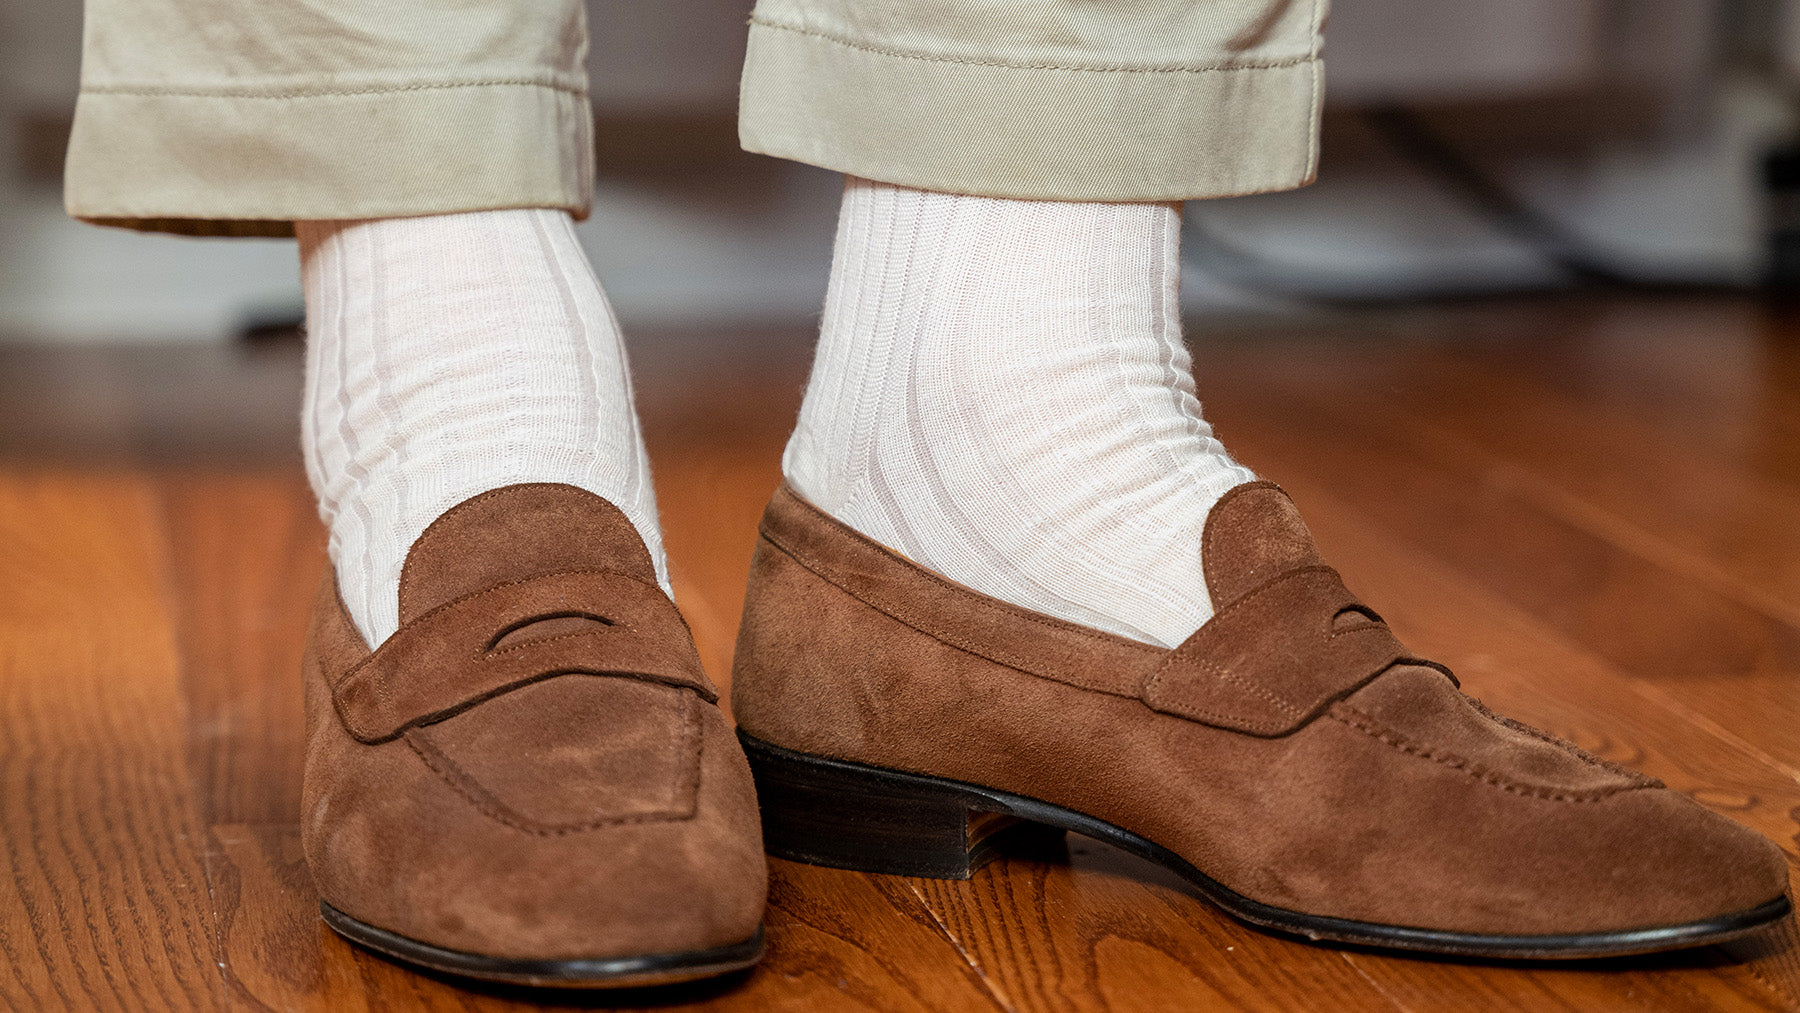 Cream Dress Socks Should Be In Your Style Rotation – Here’s Why